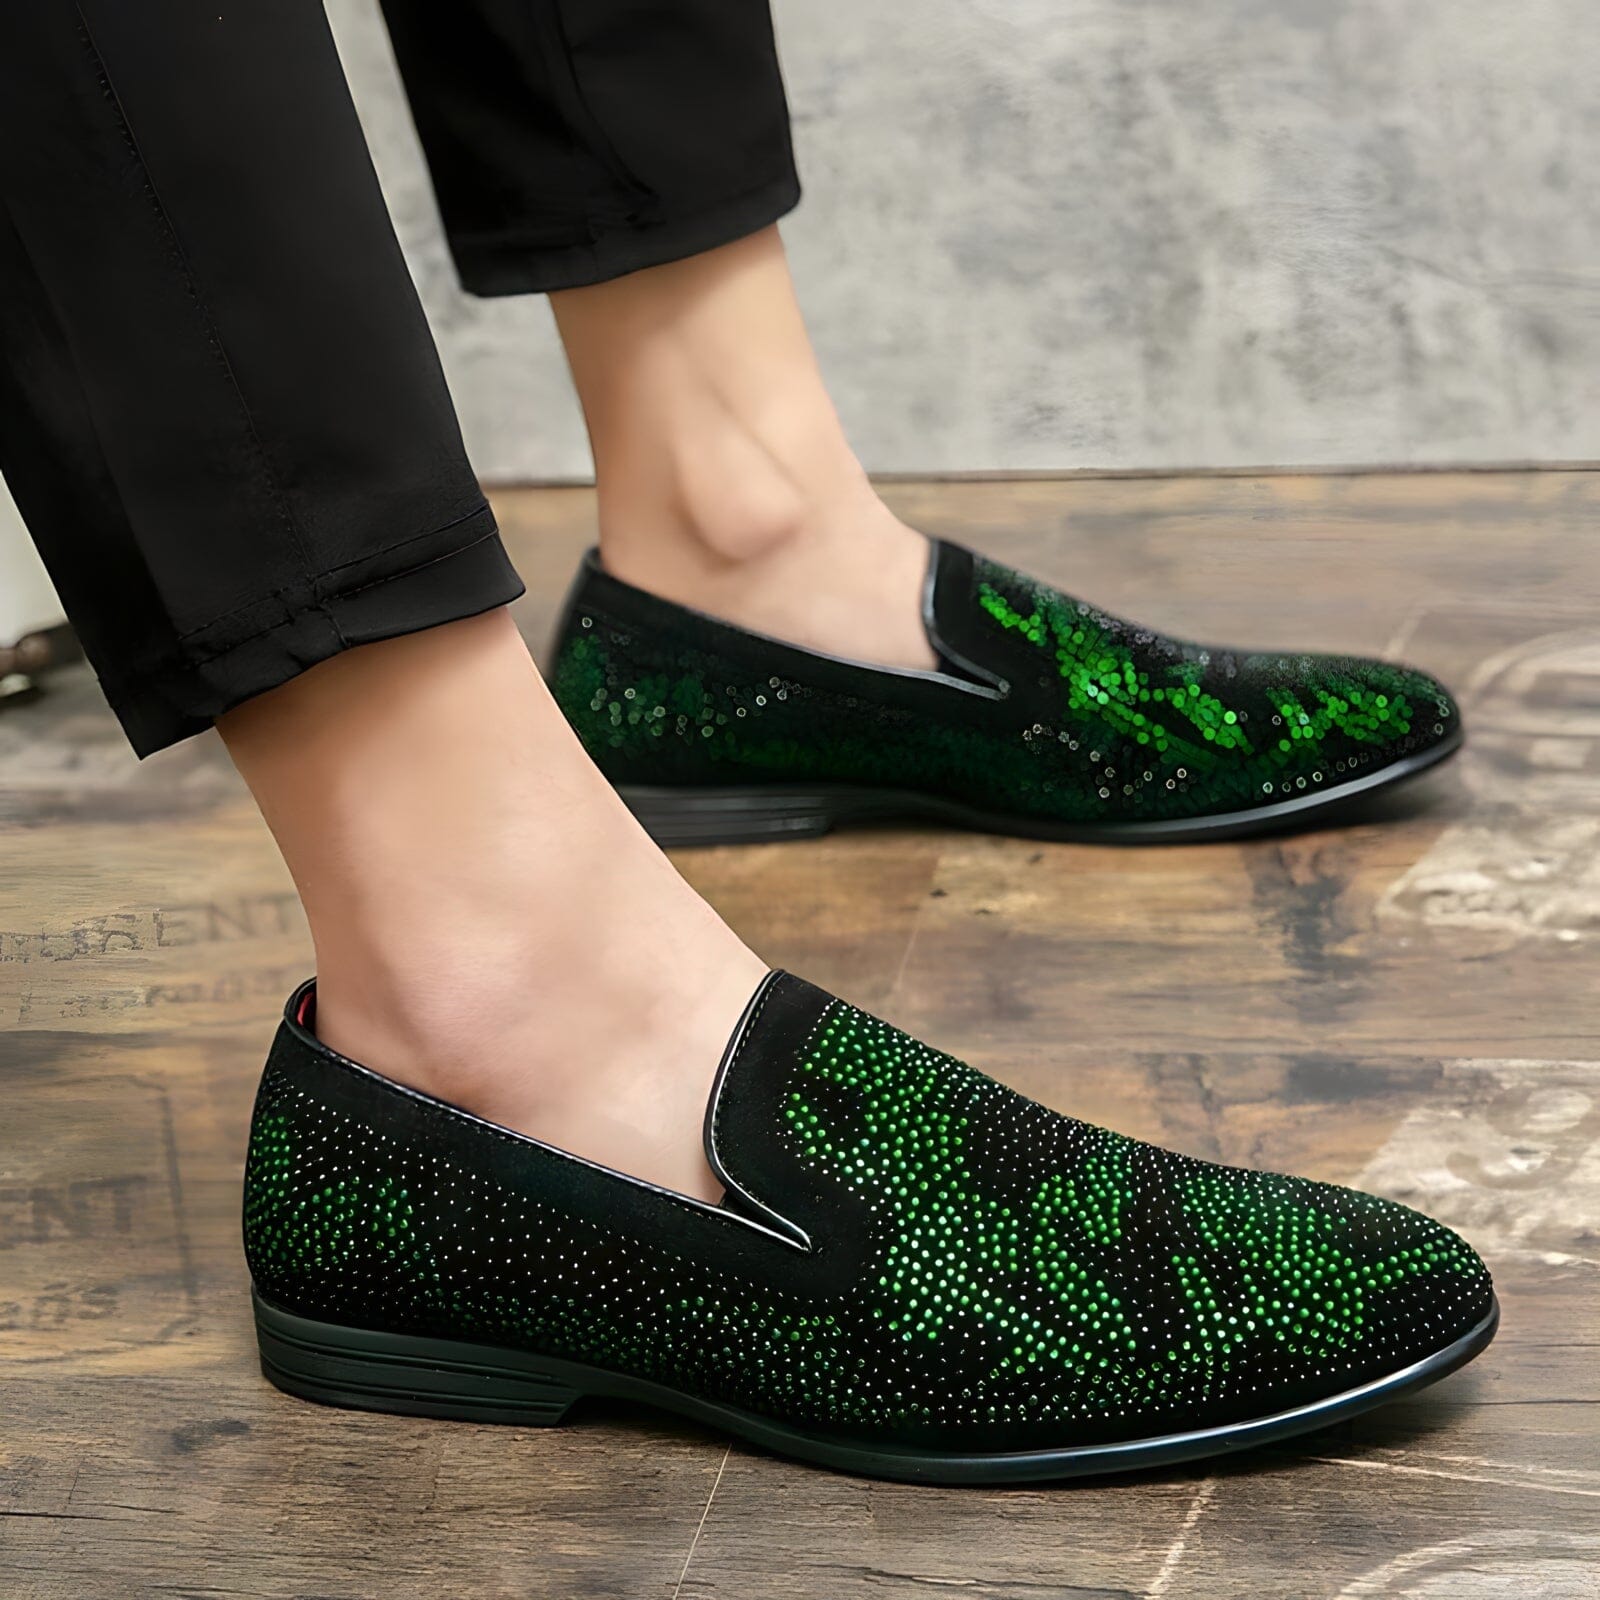 The Rio Crystal Studded Penny Loafers - Multiple Colors WD Styles Green US 5 / EU 38 